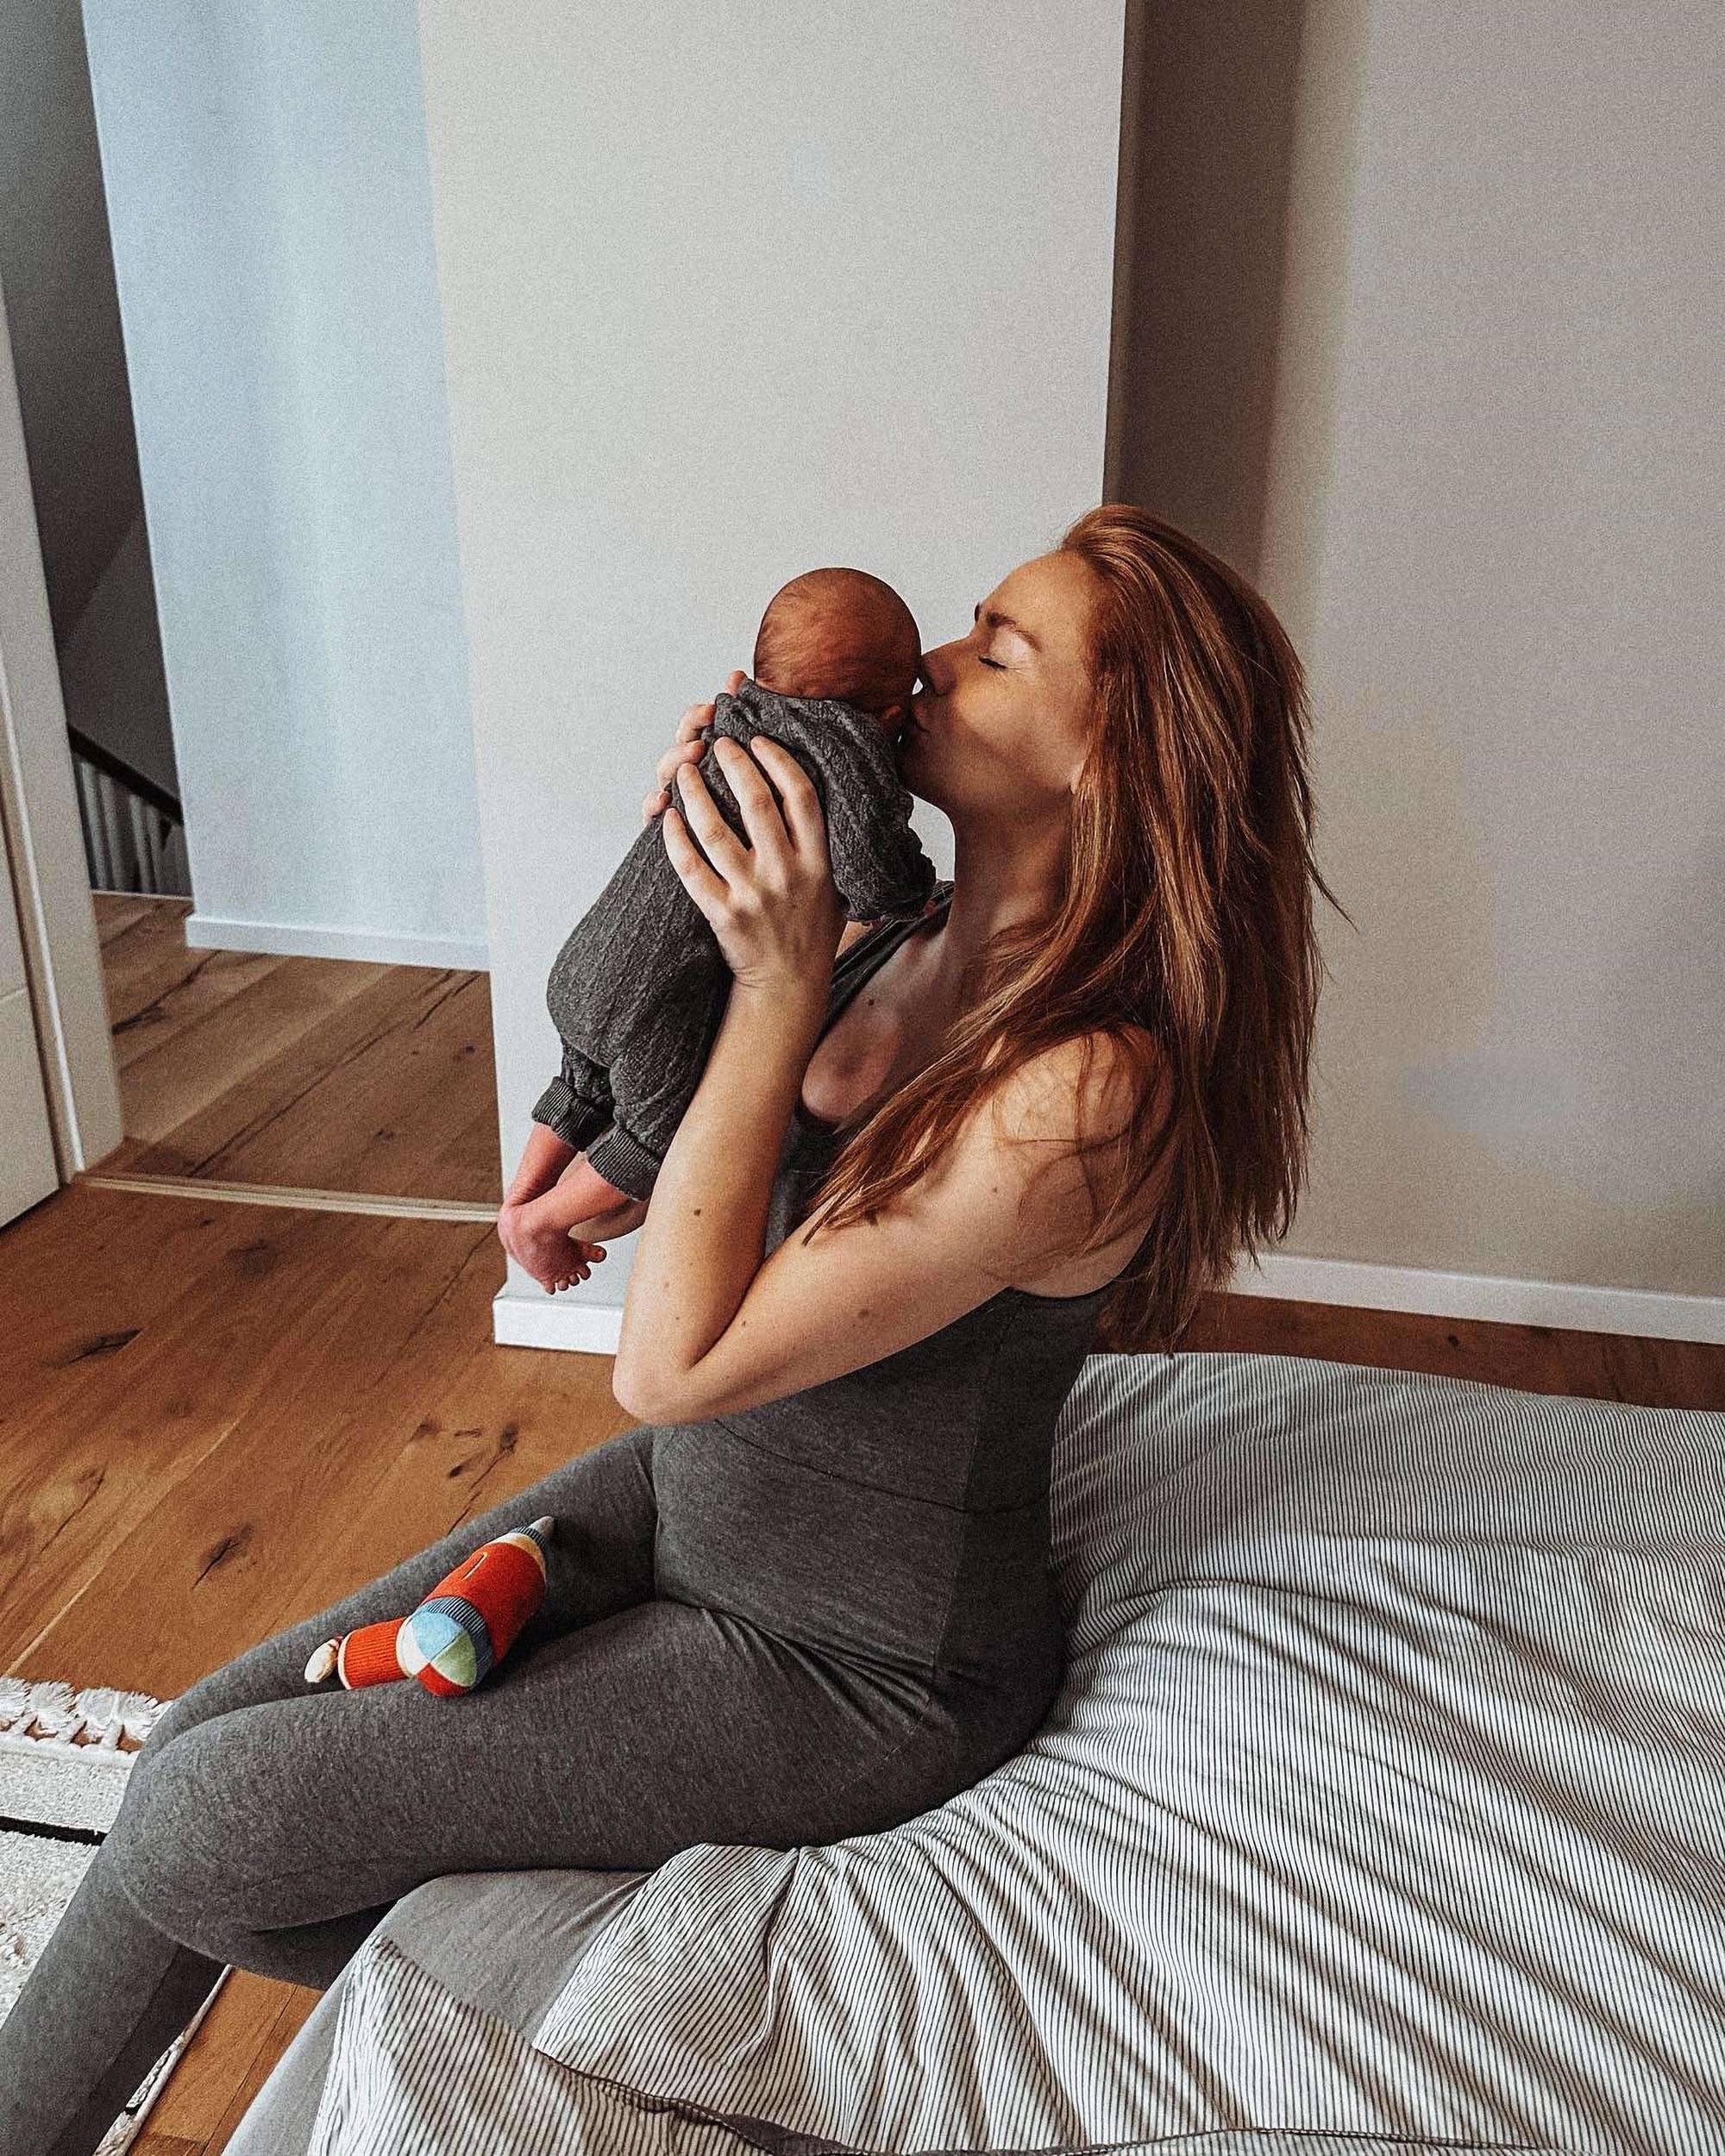 Read more about the article Stunning DIY Influencer Gives Birth